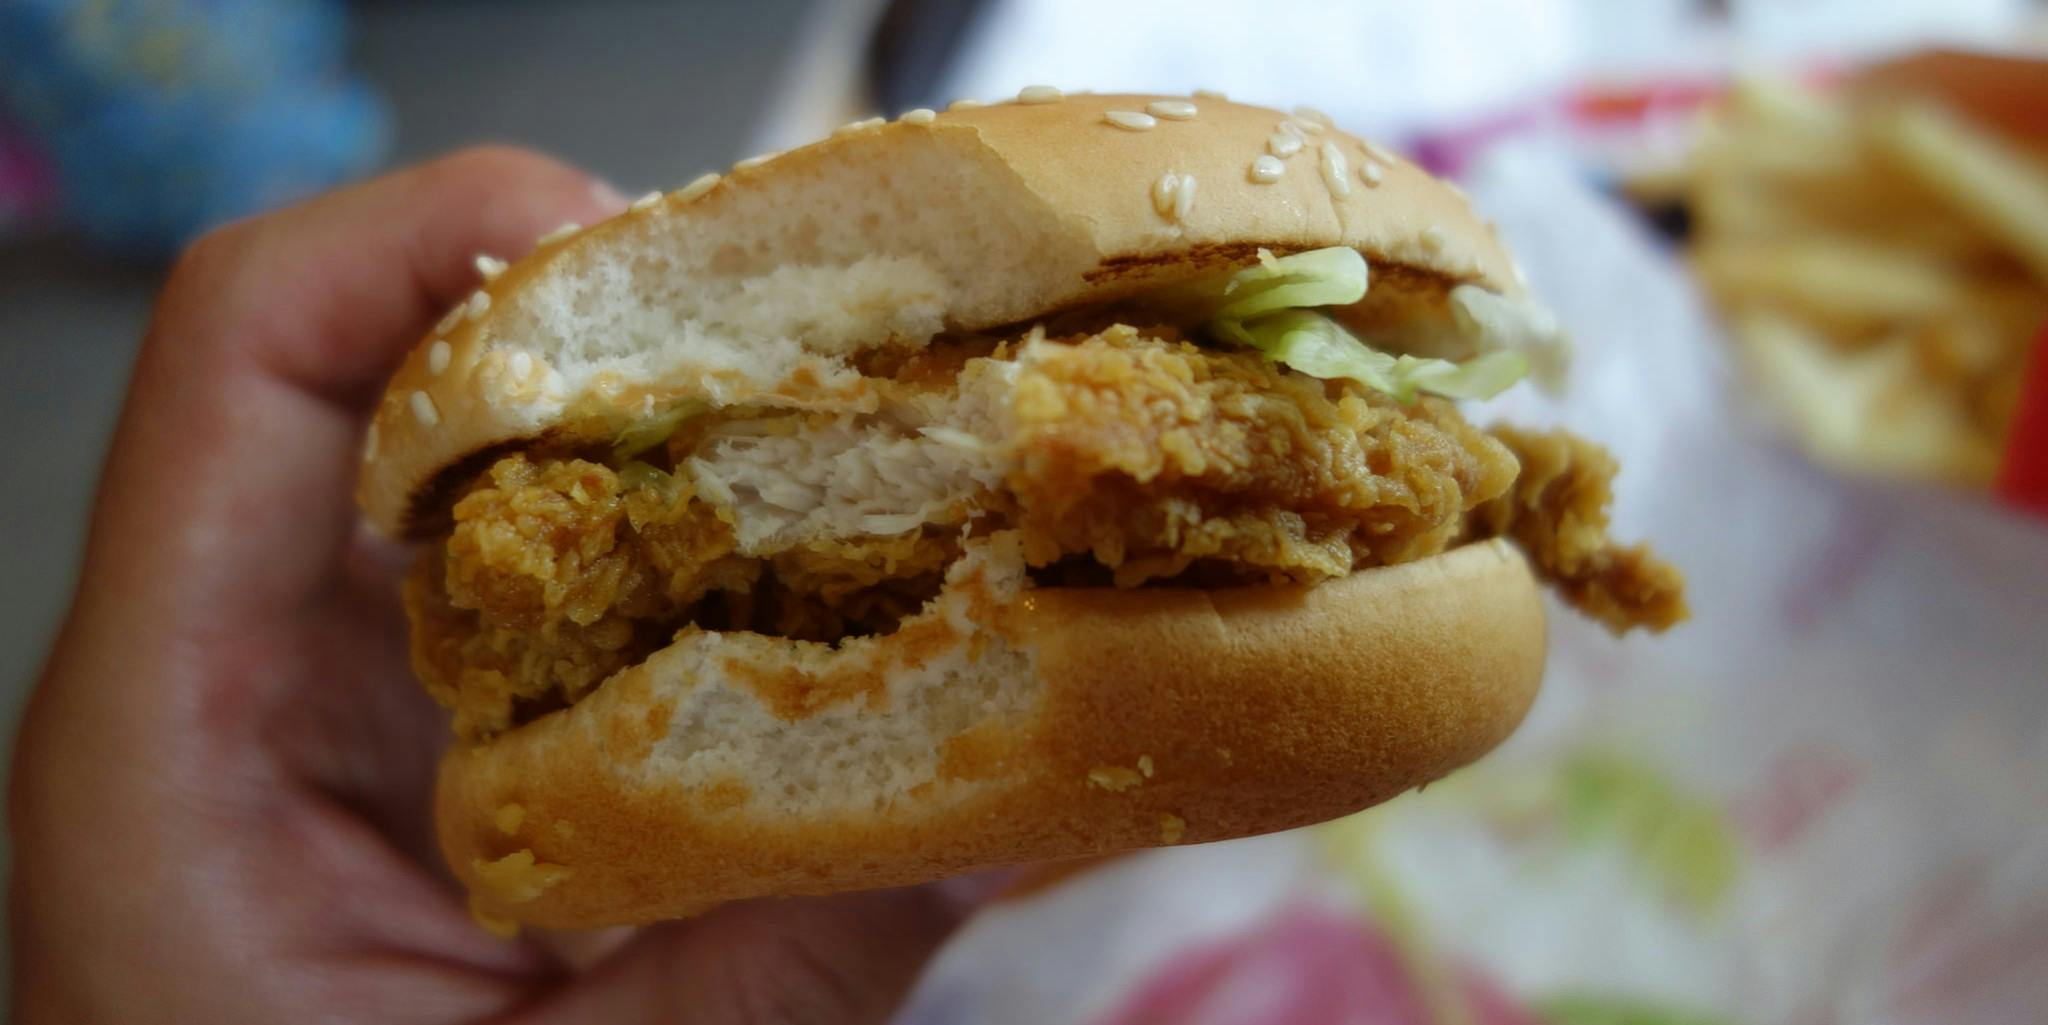 brian kirstein recommends dick in a mcchicken pic